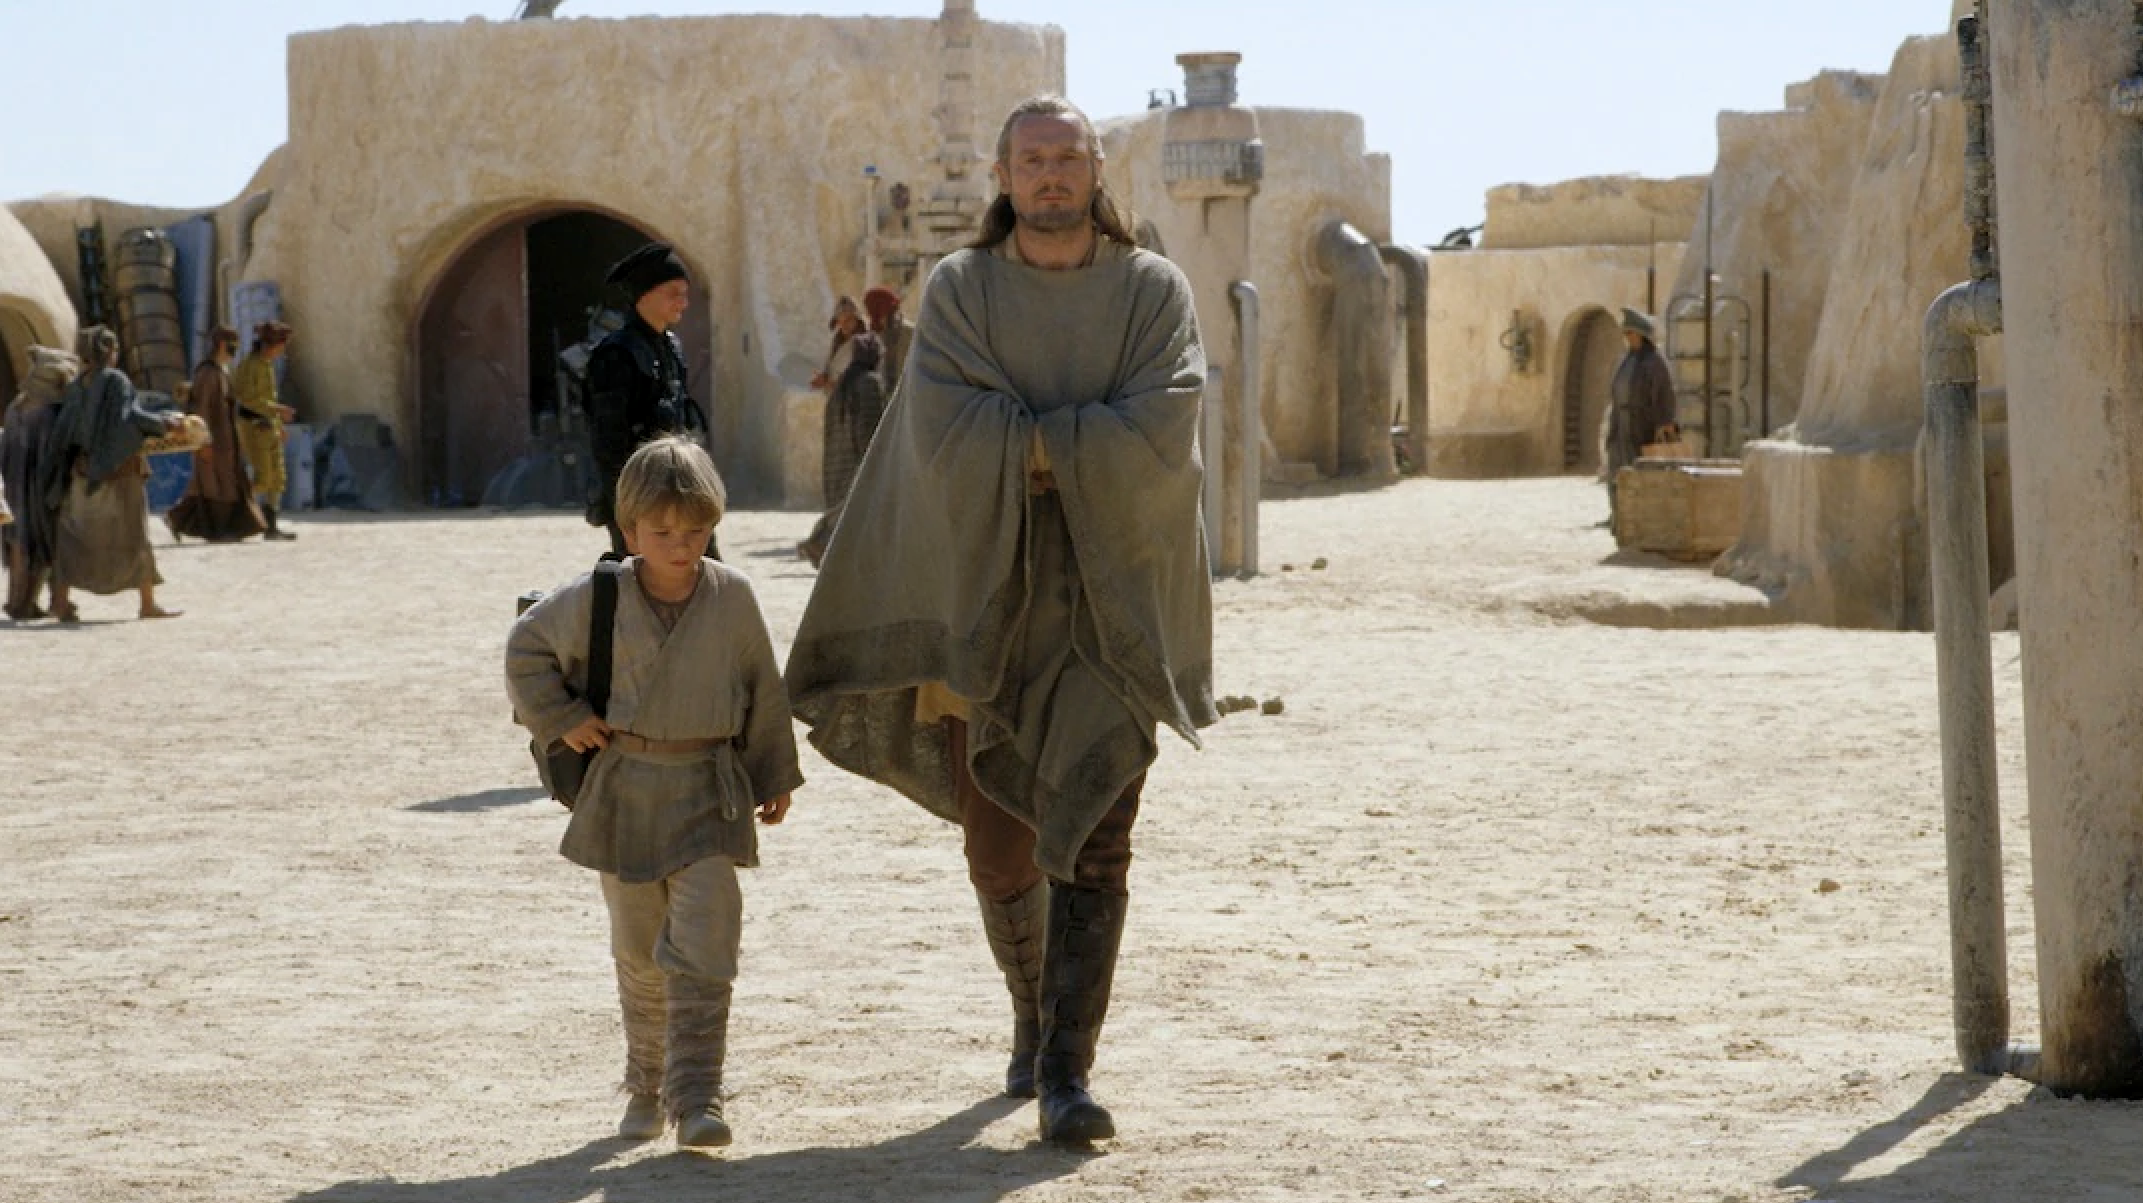 9. Are they going to explain why everyone on Tatooine wears Jedi garb? 